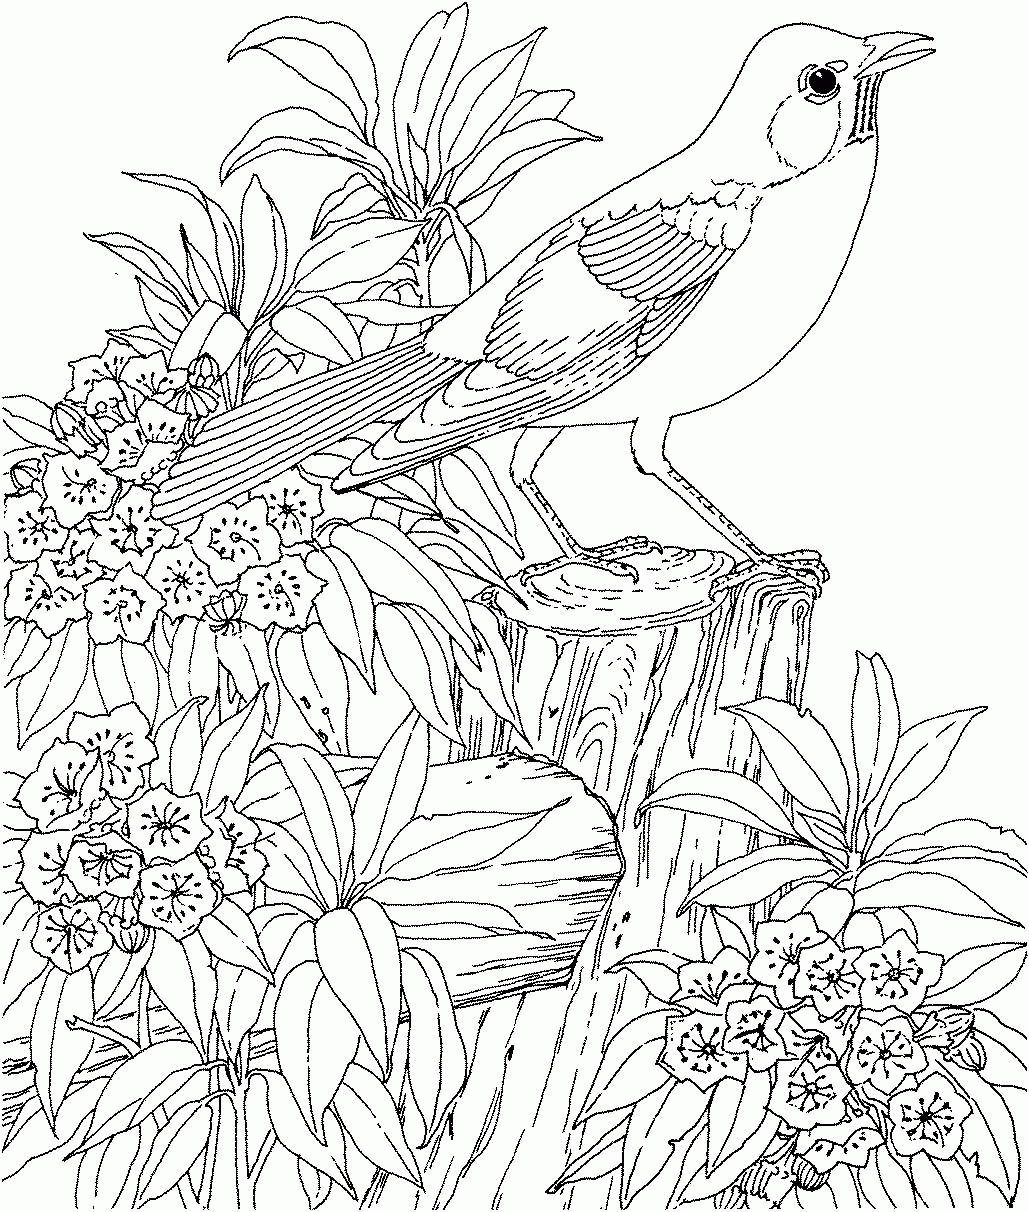 Coloring Pages For Adults Printable | Resume Format Download Pdf